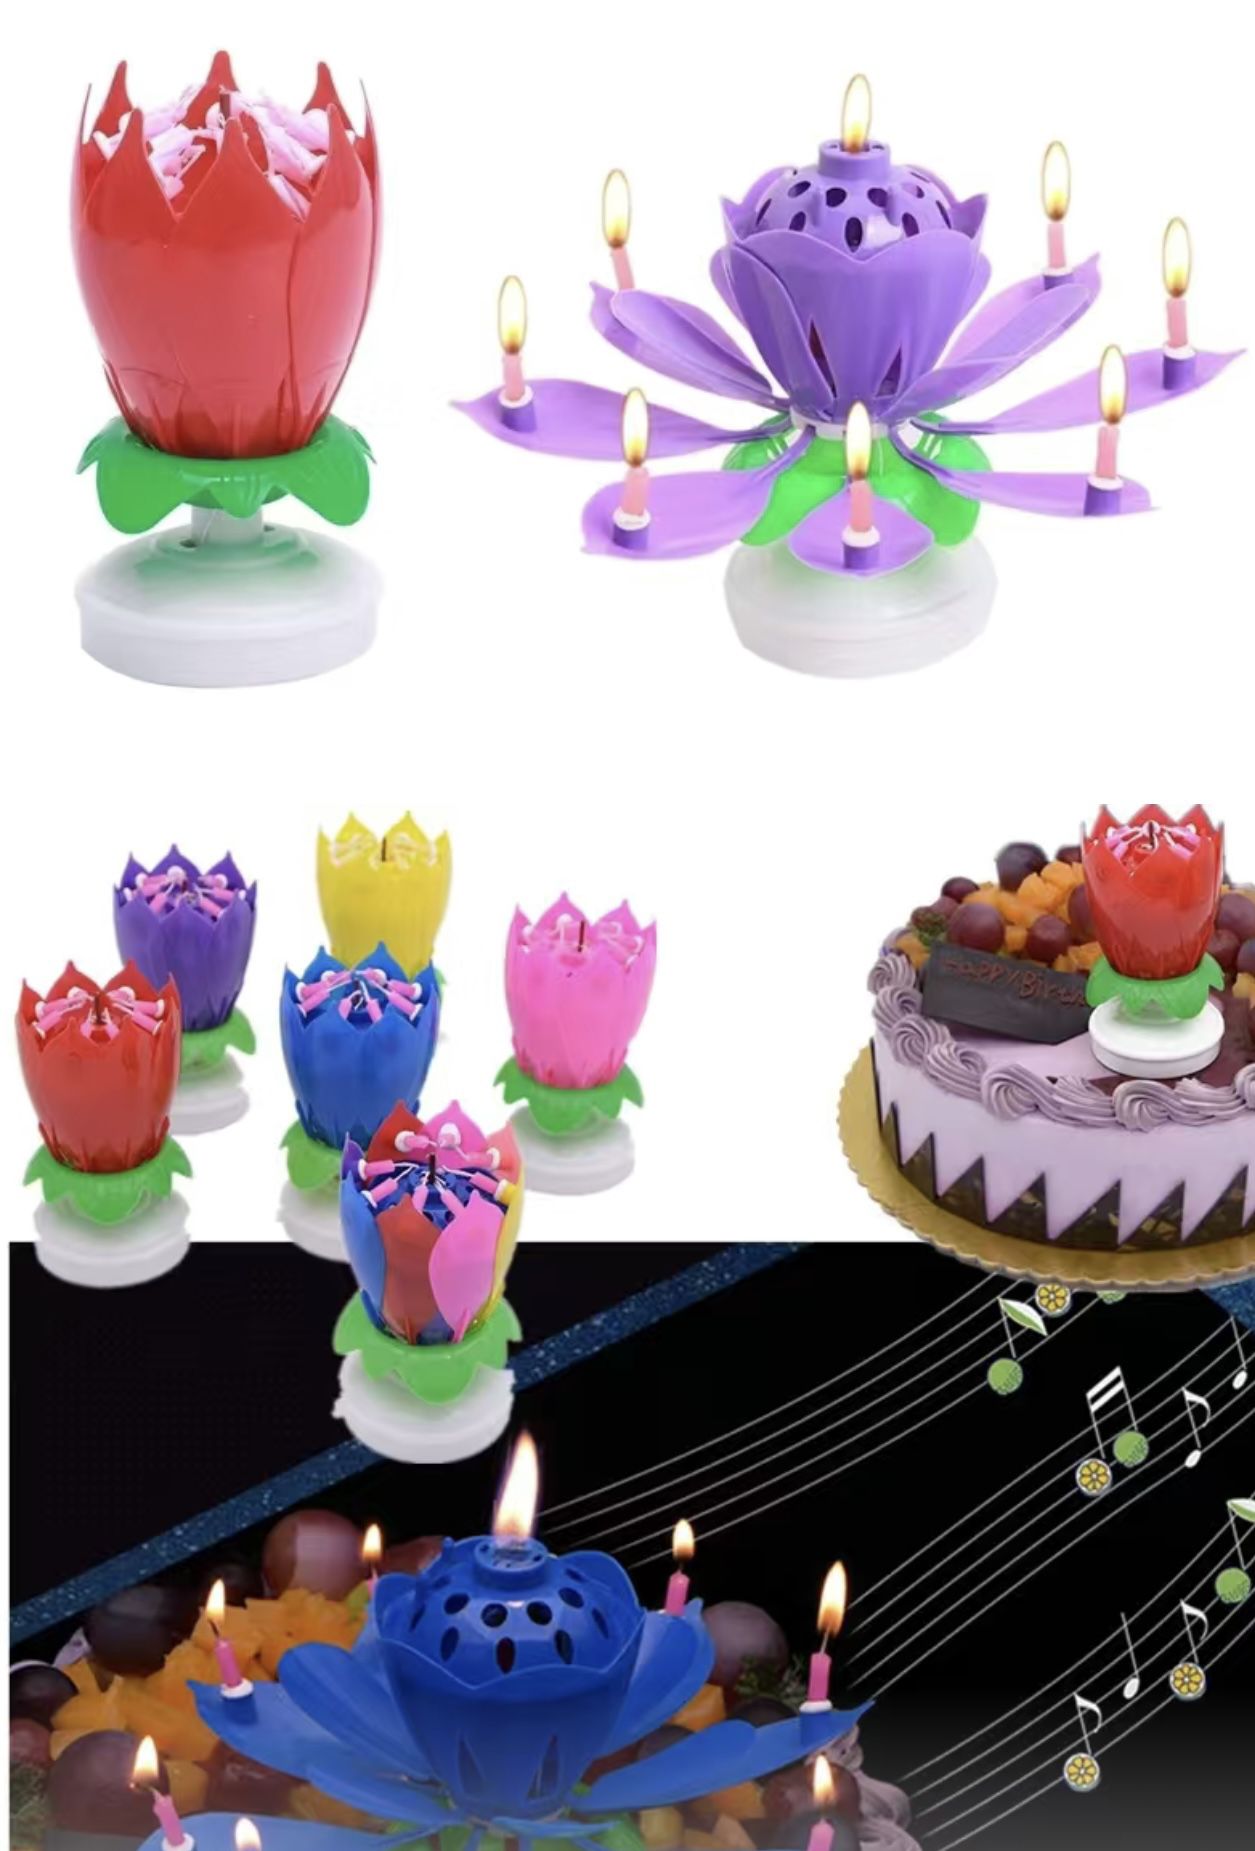 1pc Lotus Music Candle - LED Electric Birthday Candle with Visual Effect, Rotating Music & Flower Shaped Design - Perfect for Birthday Parties, Holida